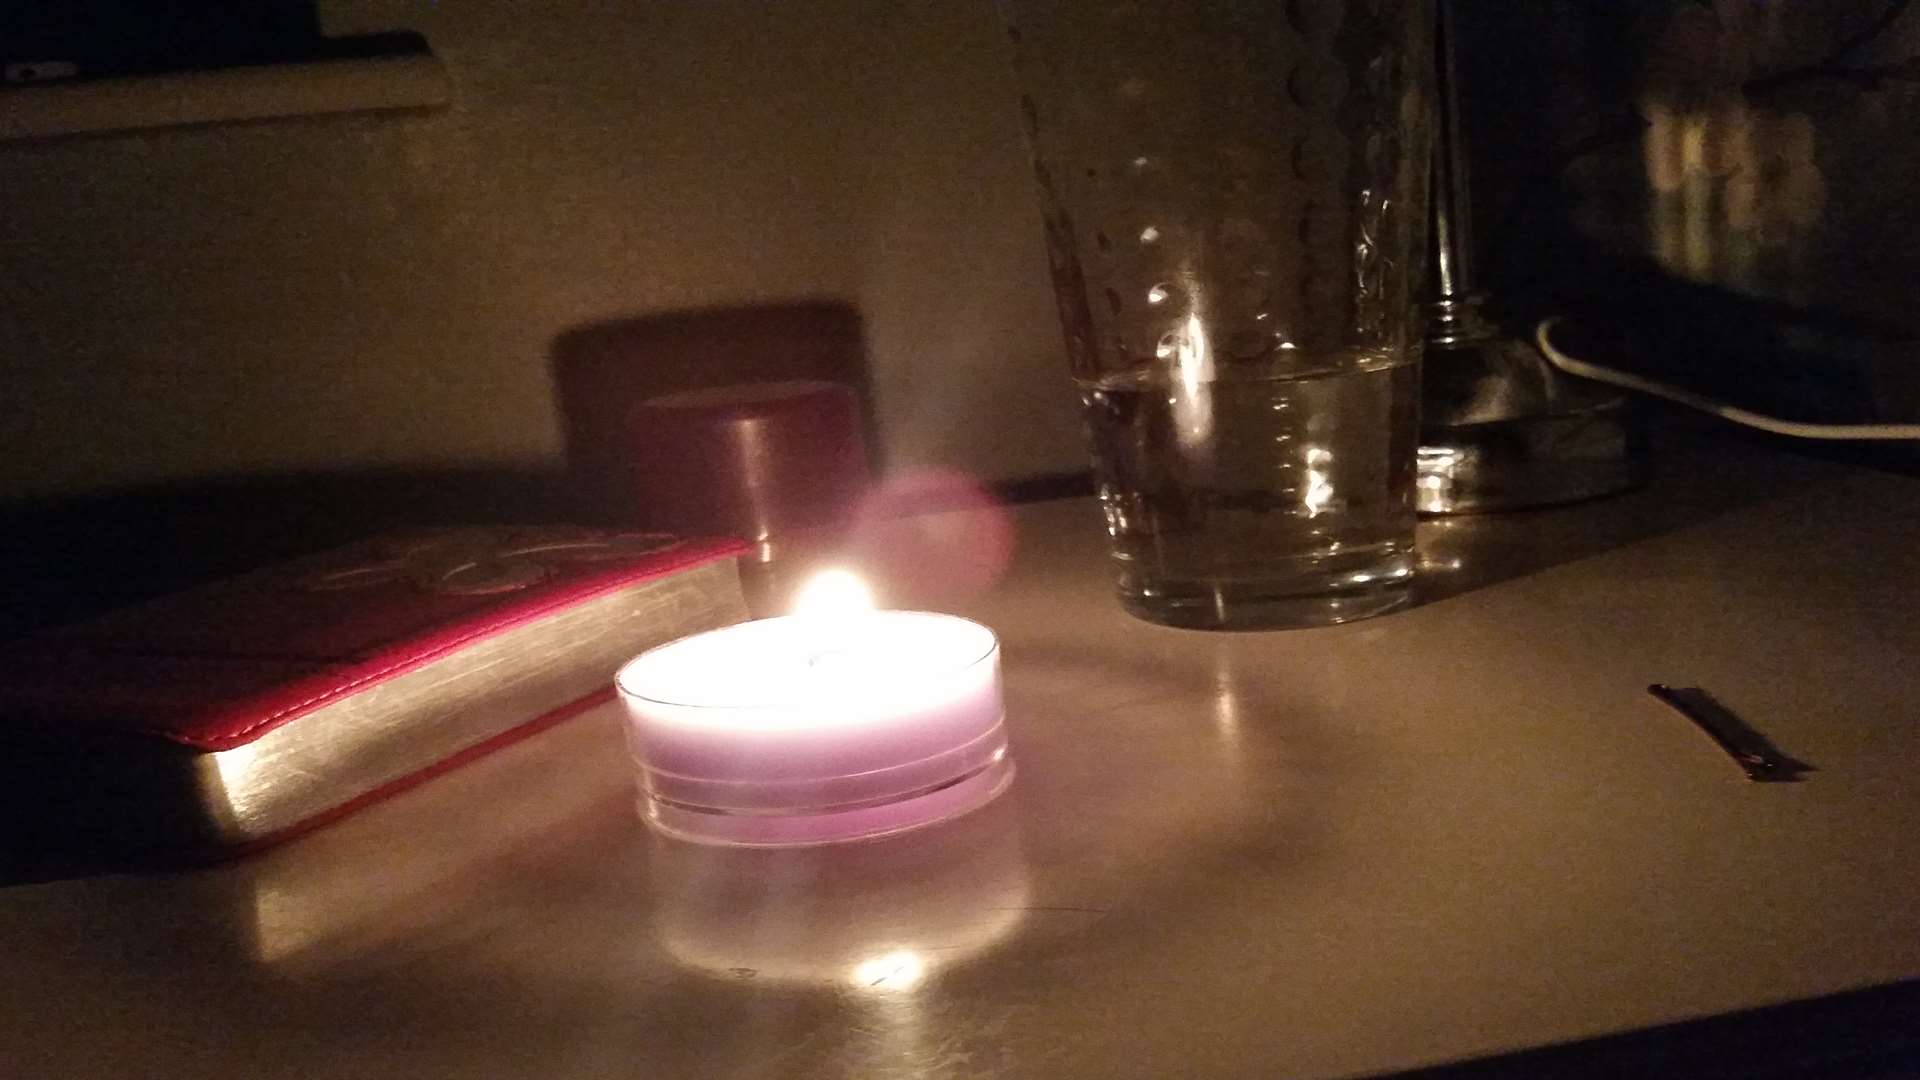 Louise Lea's picture of her candle during Lights Out